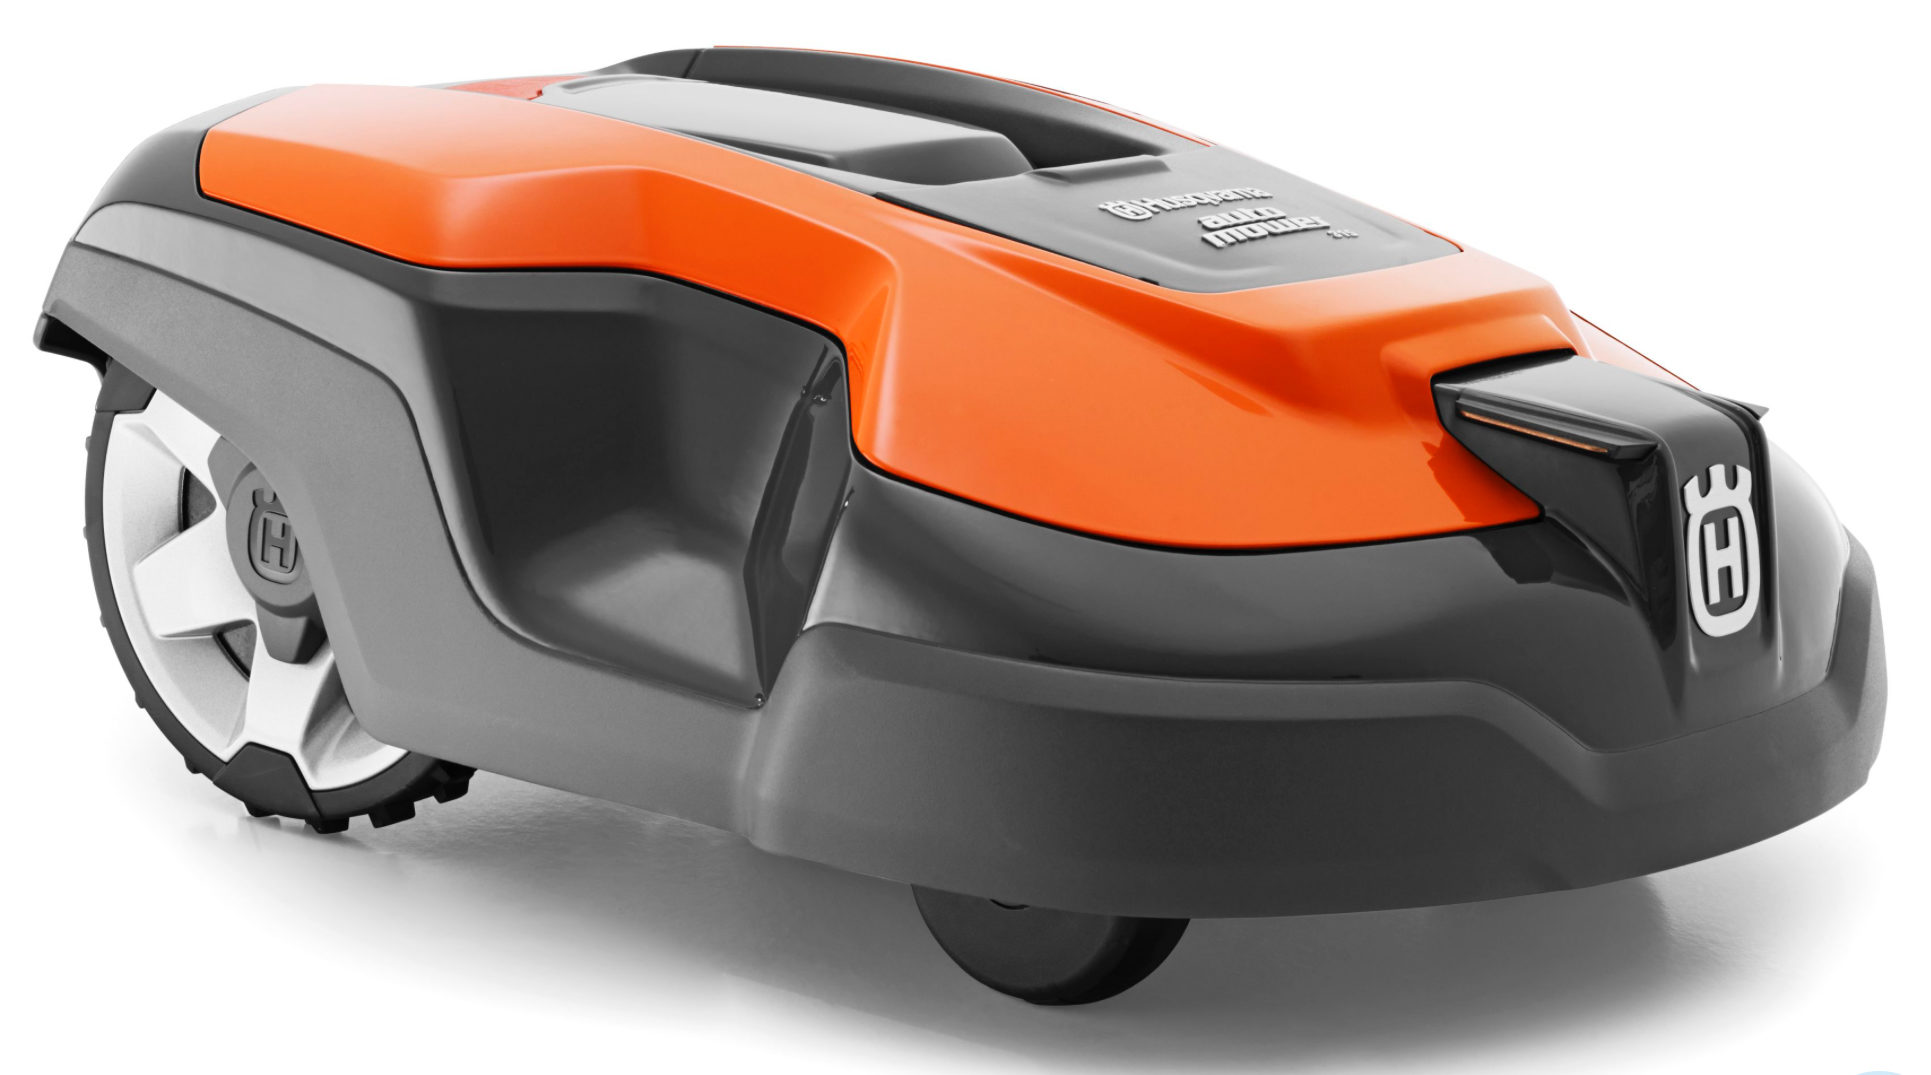 Designed to stealth around your yard unattended, the Husqvarna Automower 315X brings robotic prowess to your yard while it manicures the turf. Image: Husqvarna.